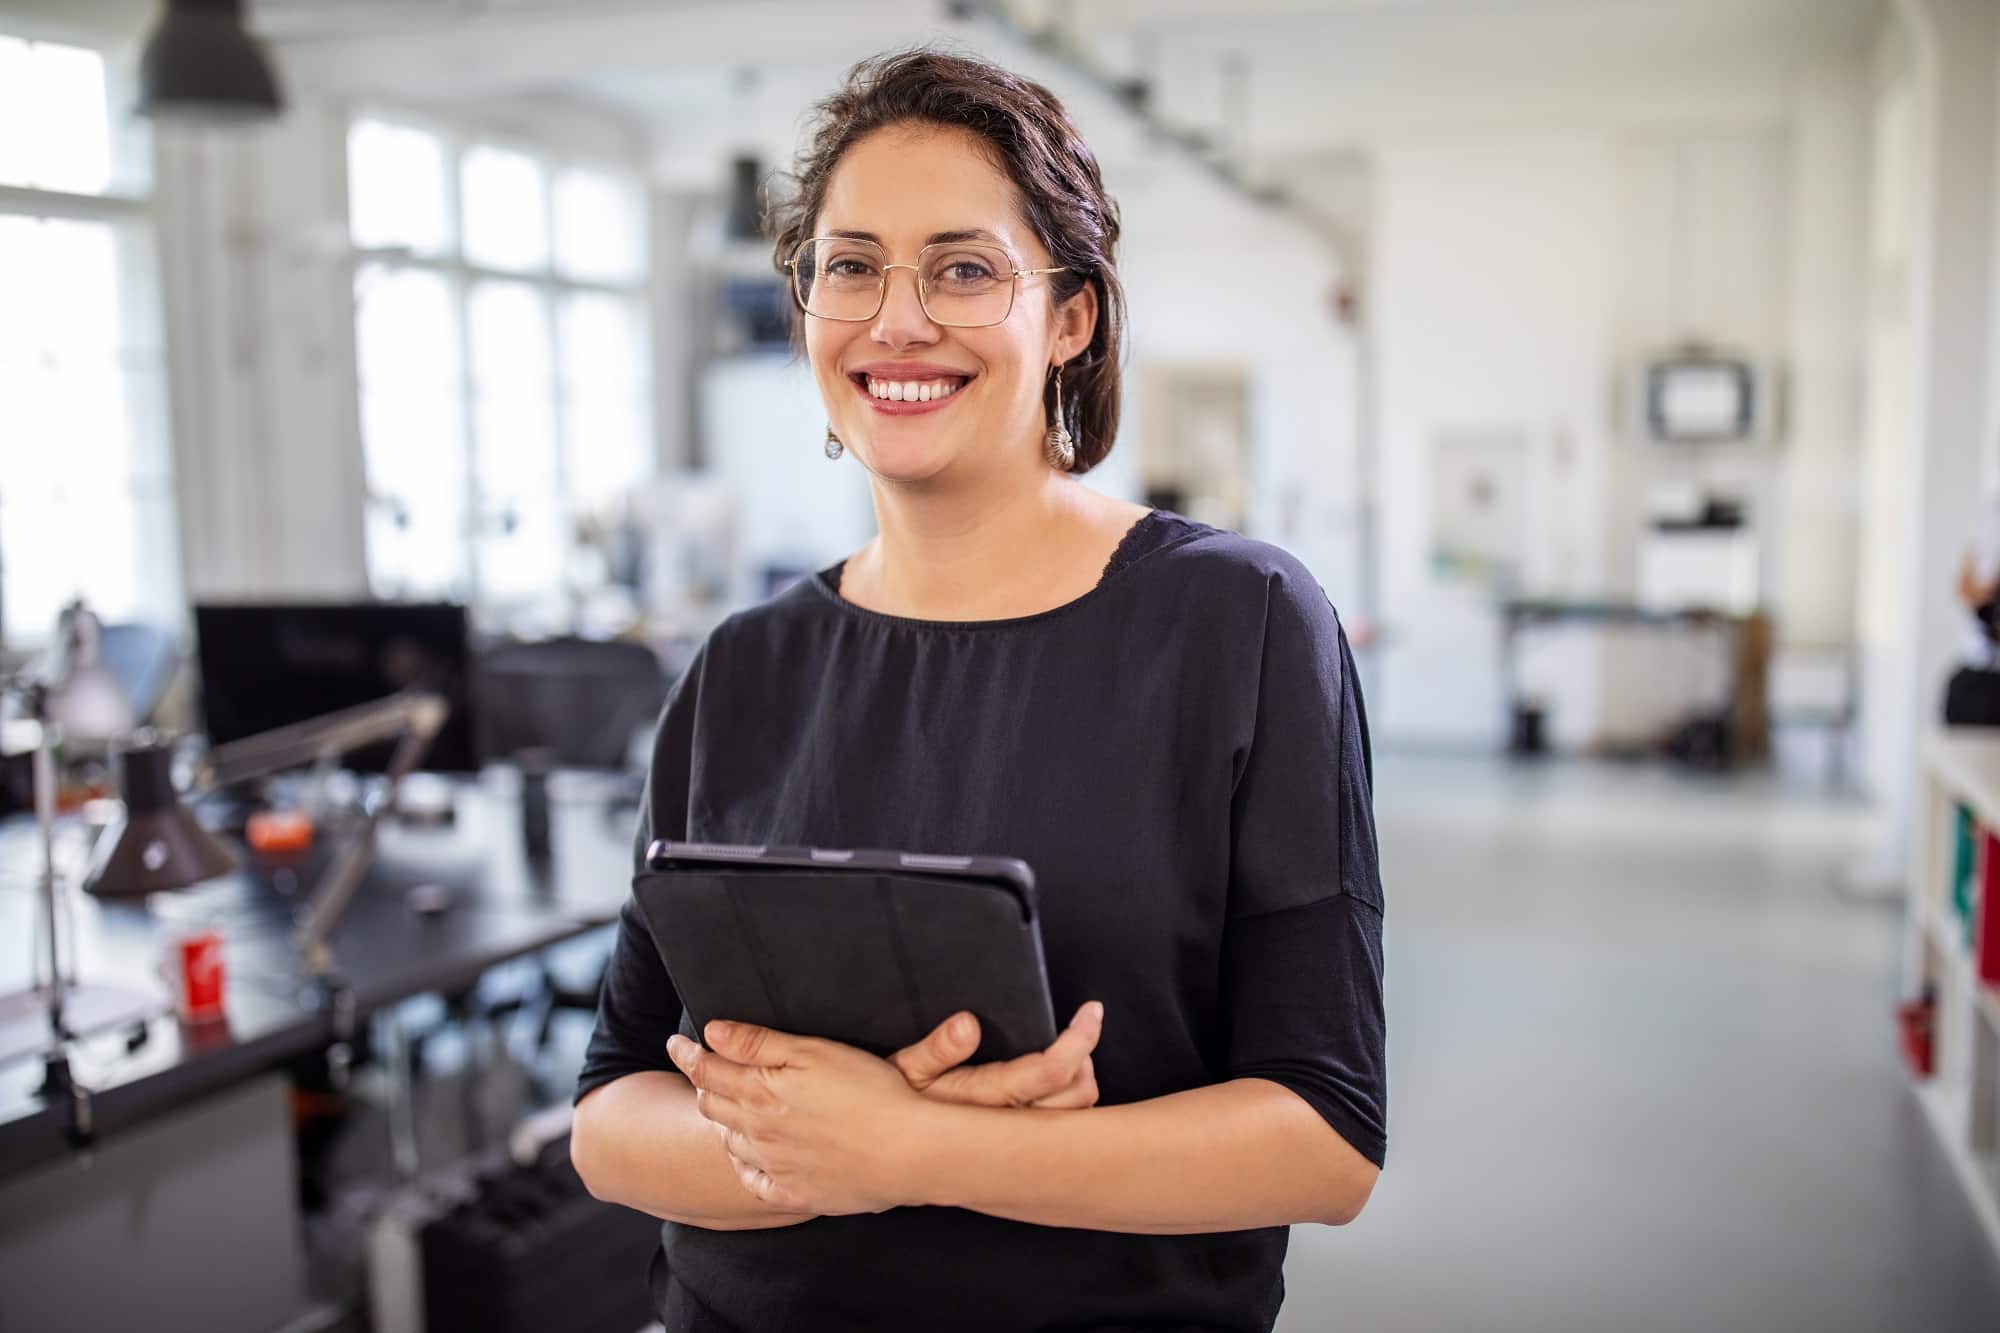 Portrait of a mature businesswoman holding a digital tablet in office. Smiling female professional standing at modern workplace.